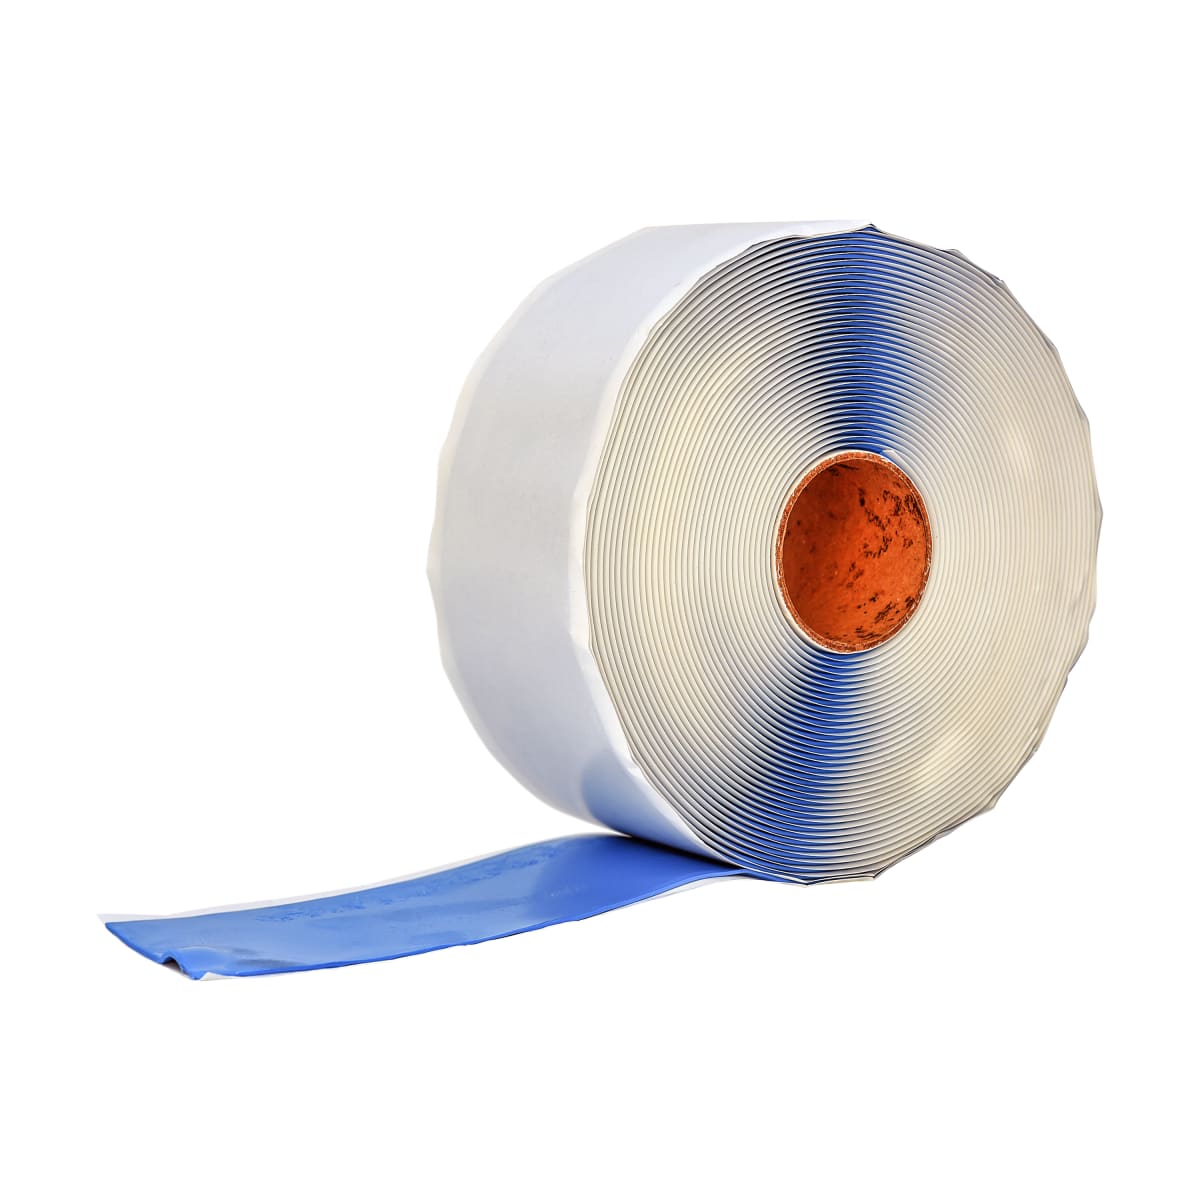 Visqueen Tape  Best Tape for Hanging Plastic Sheeting